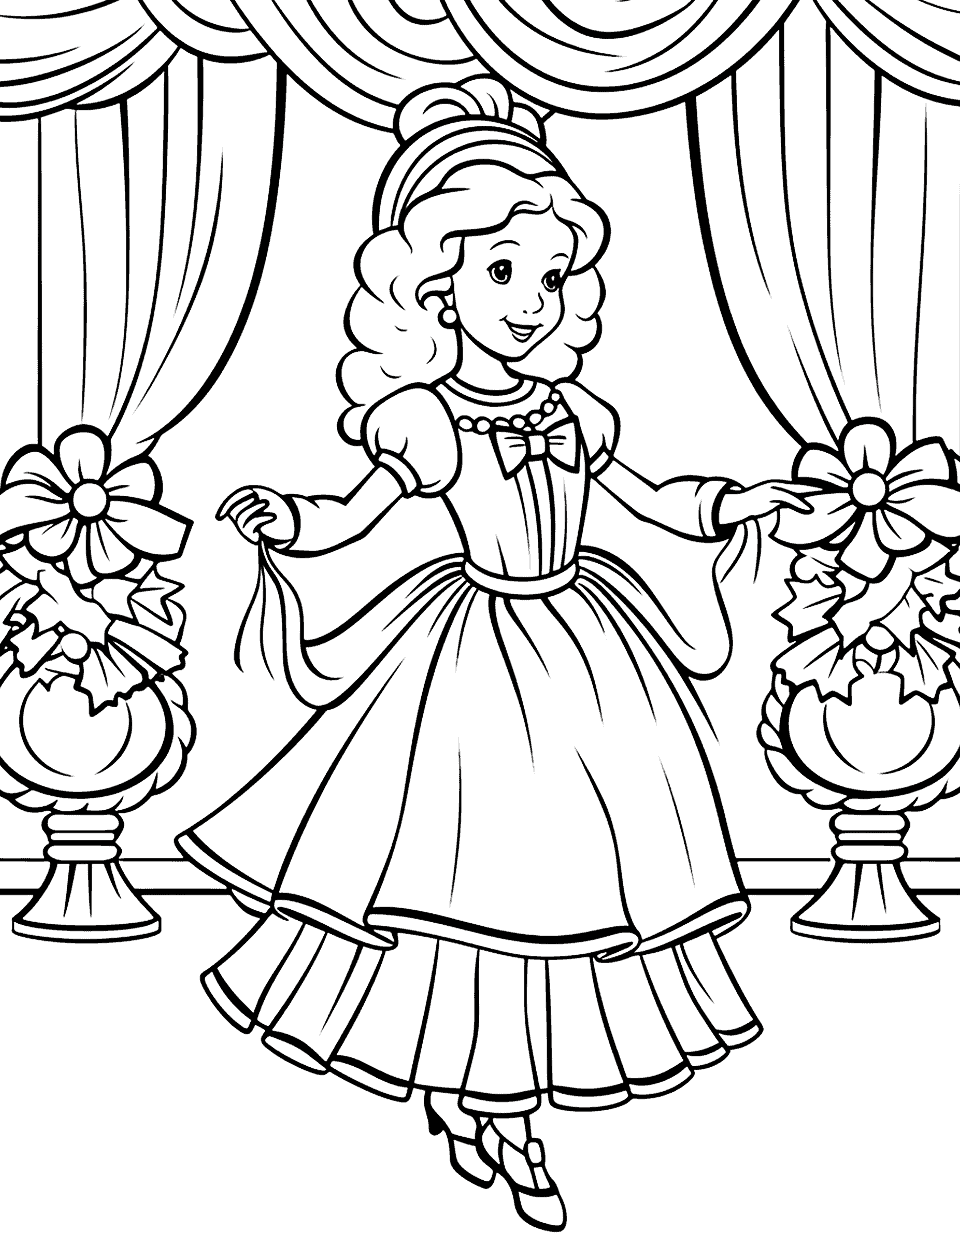 Nutcracker Ballet Christmas Coloring Page - A scene from the famous Nutcracker ballet with the Sugar Plum Fairy.